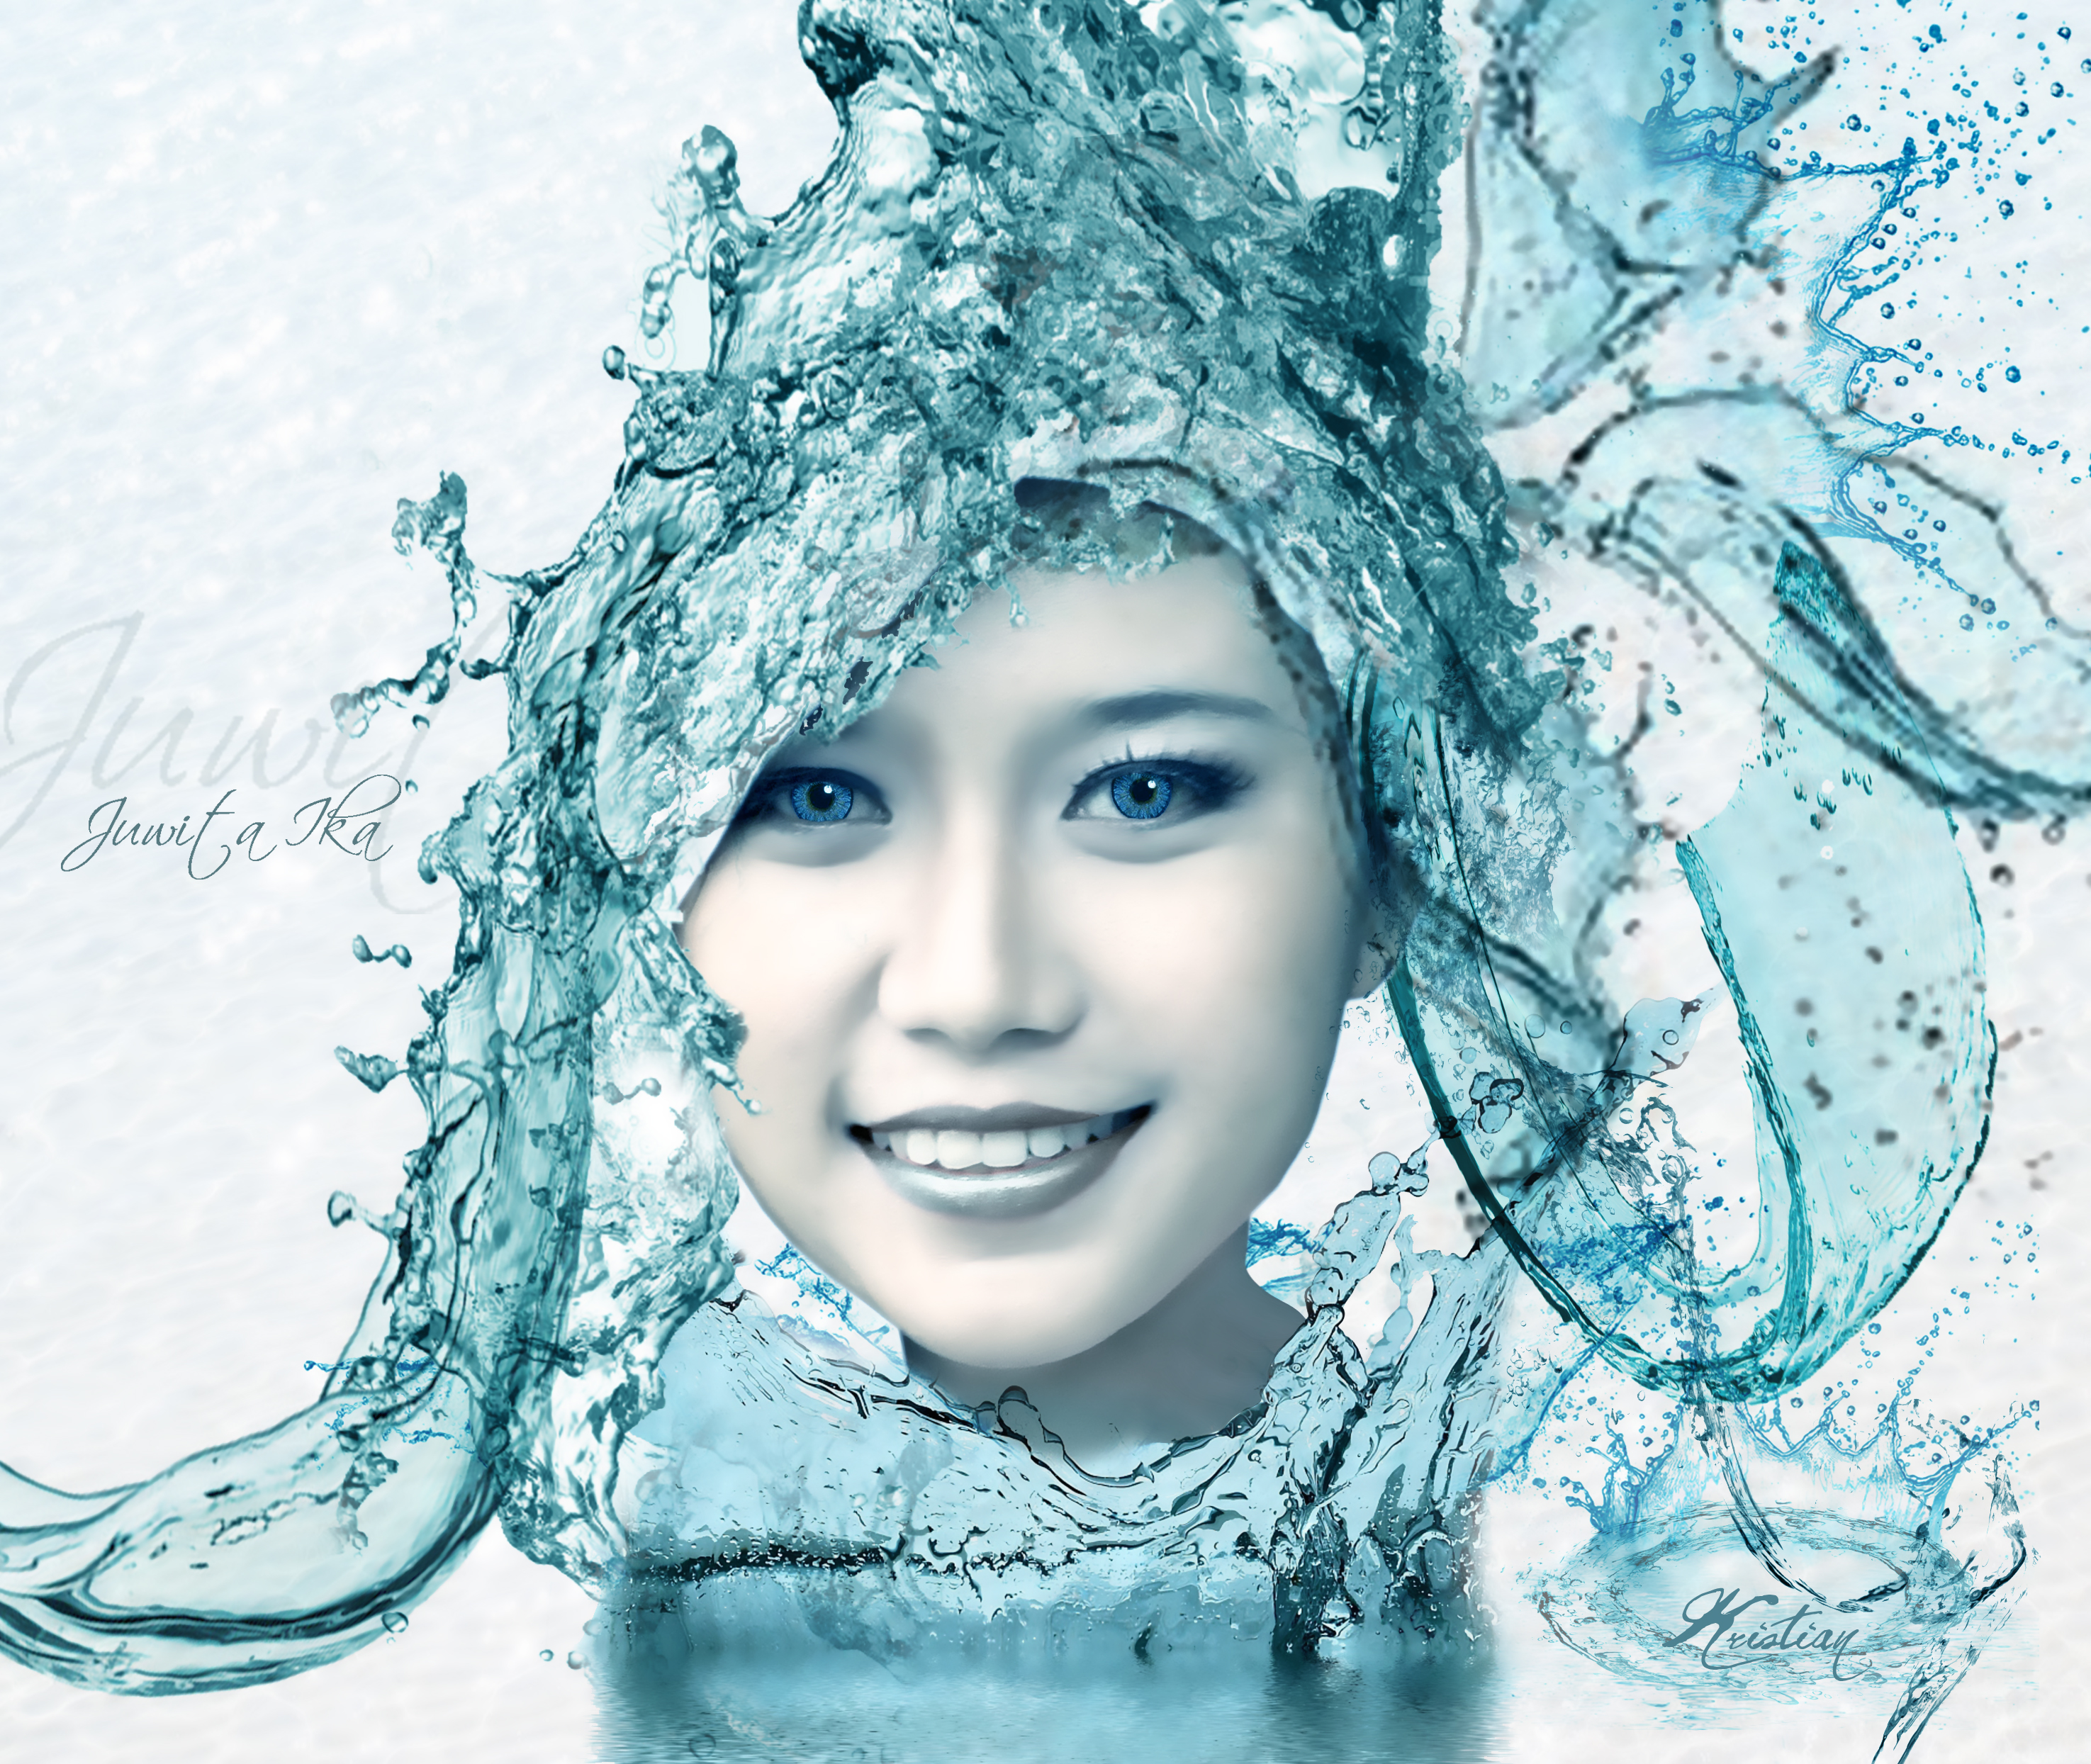 Water girl wallpaper from Fantasy wallpapers